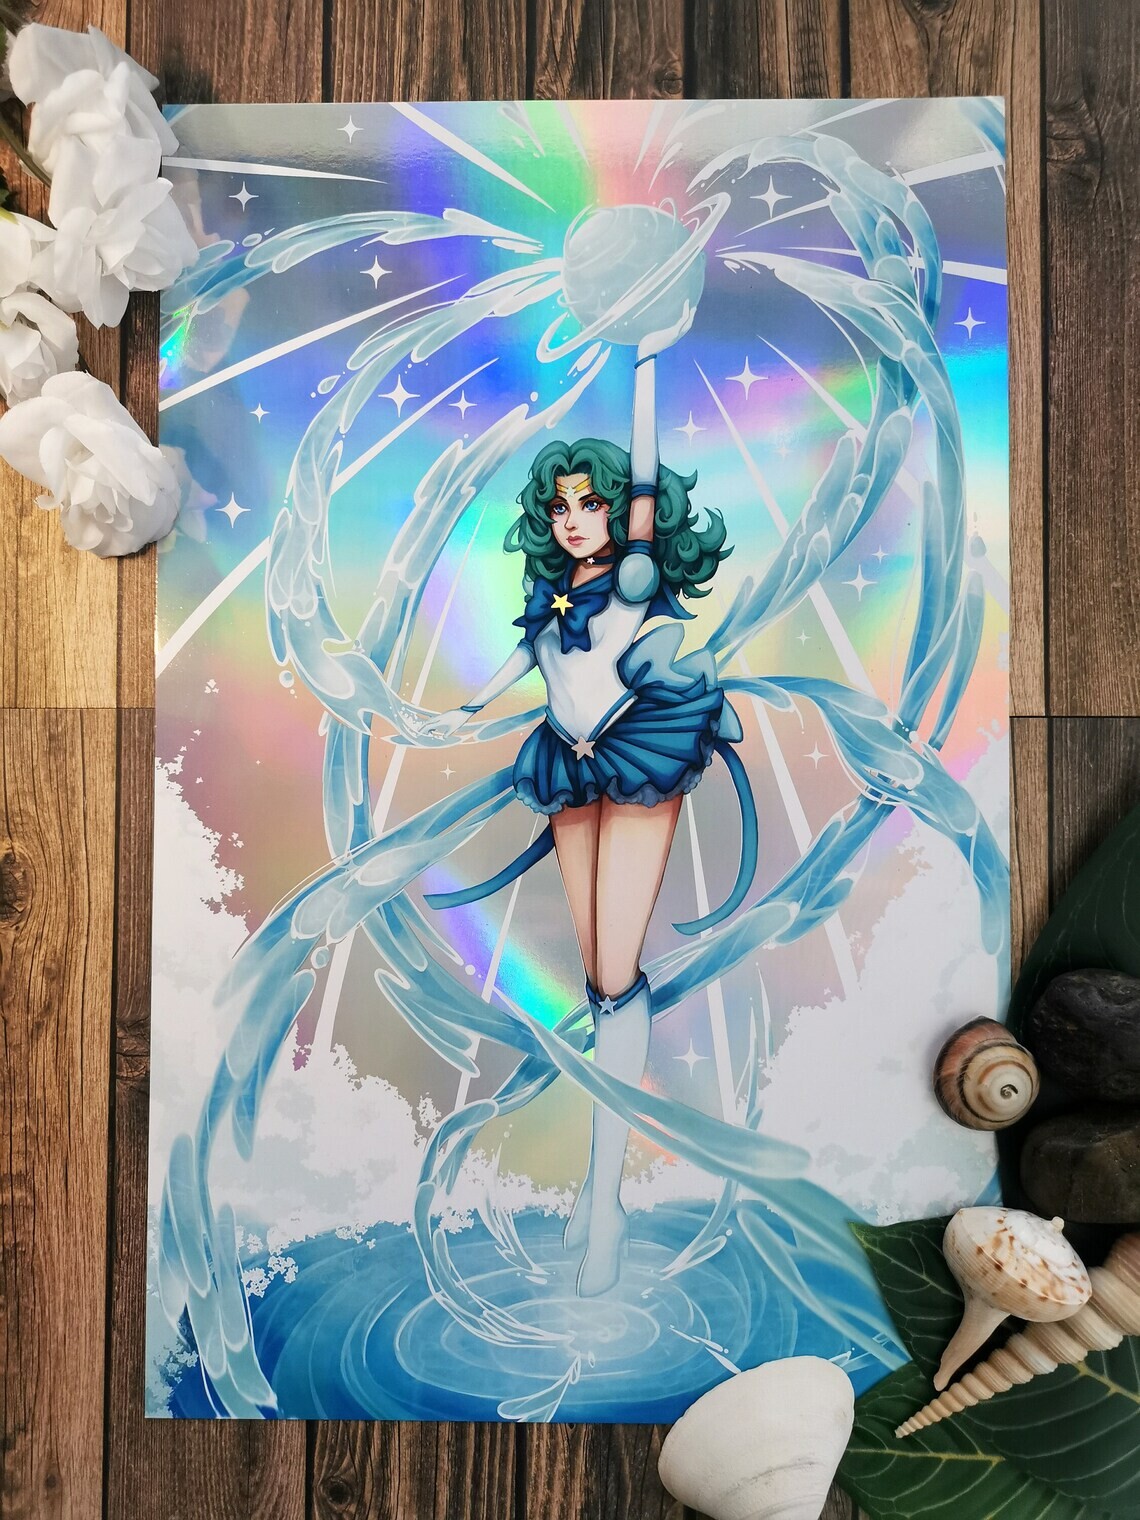 Fan-Art - Printed as holographic print